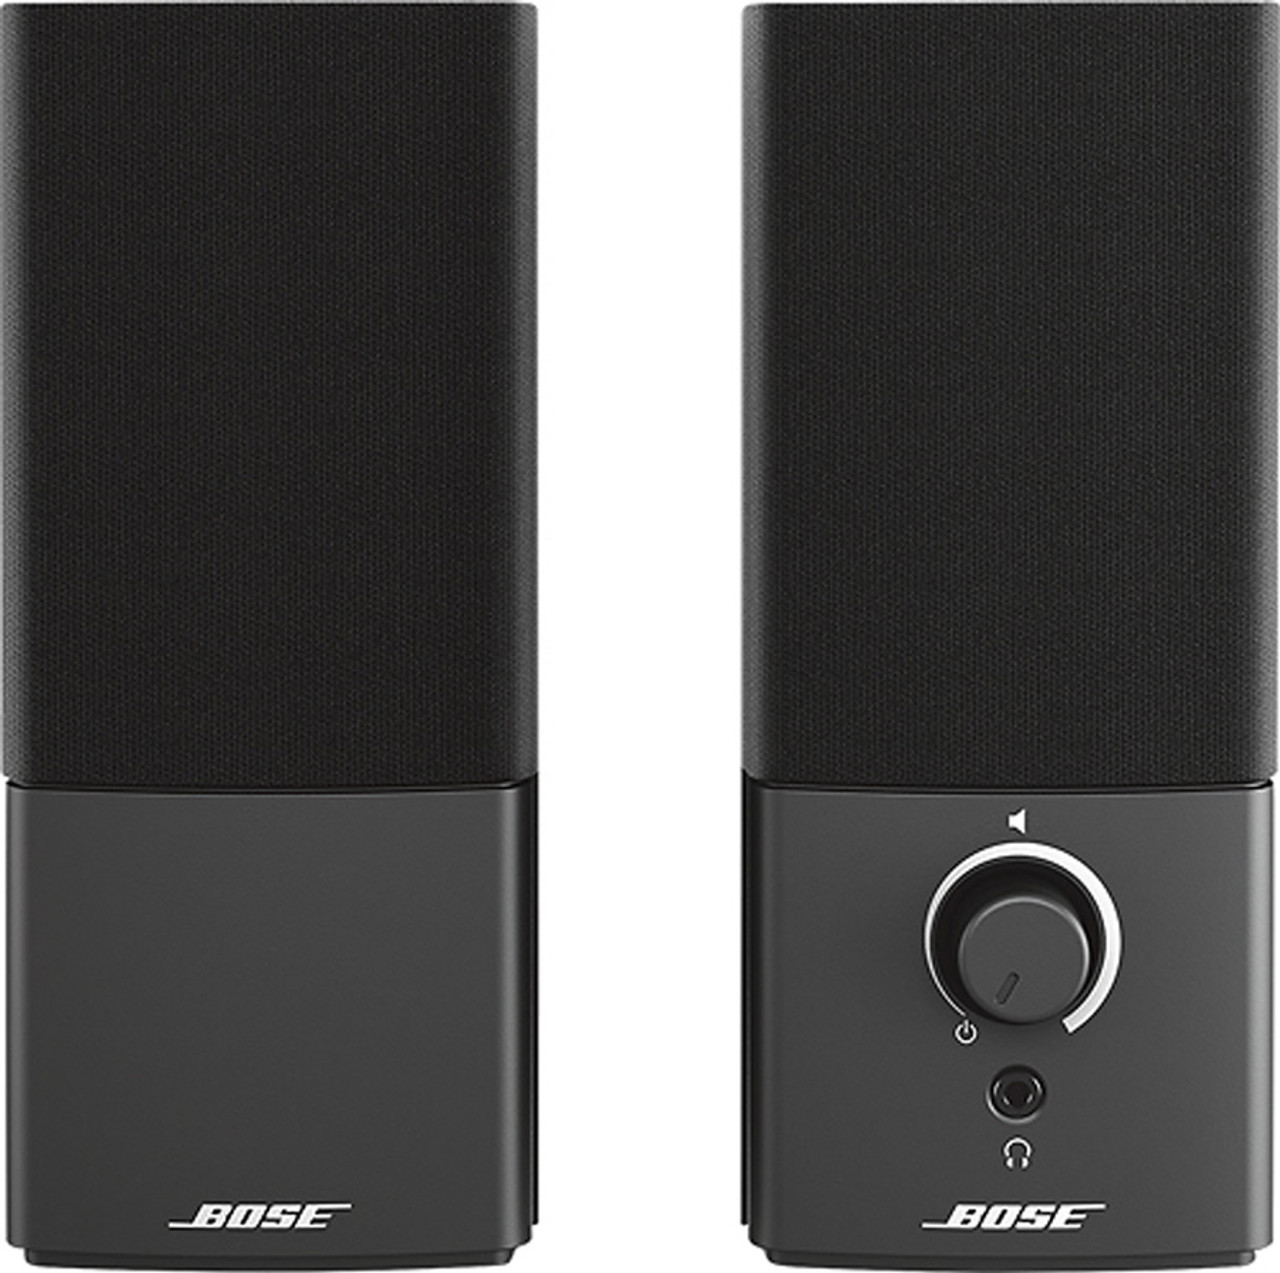 Bose Companion 2 Series III Multimedia Speaker System With Power Cord